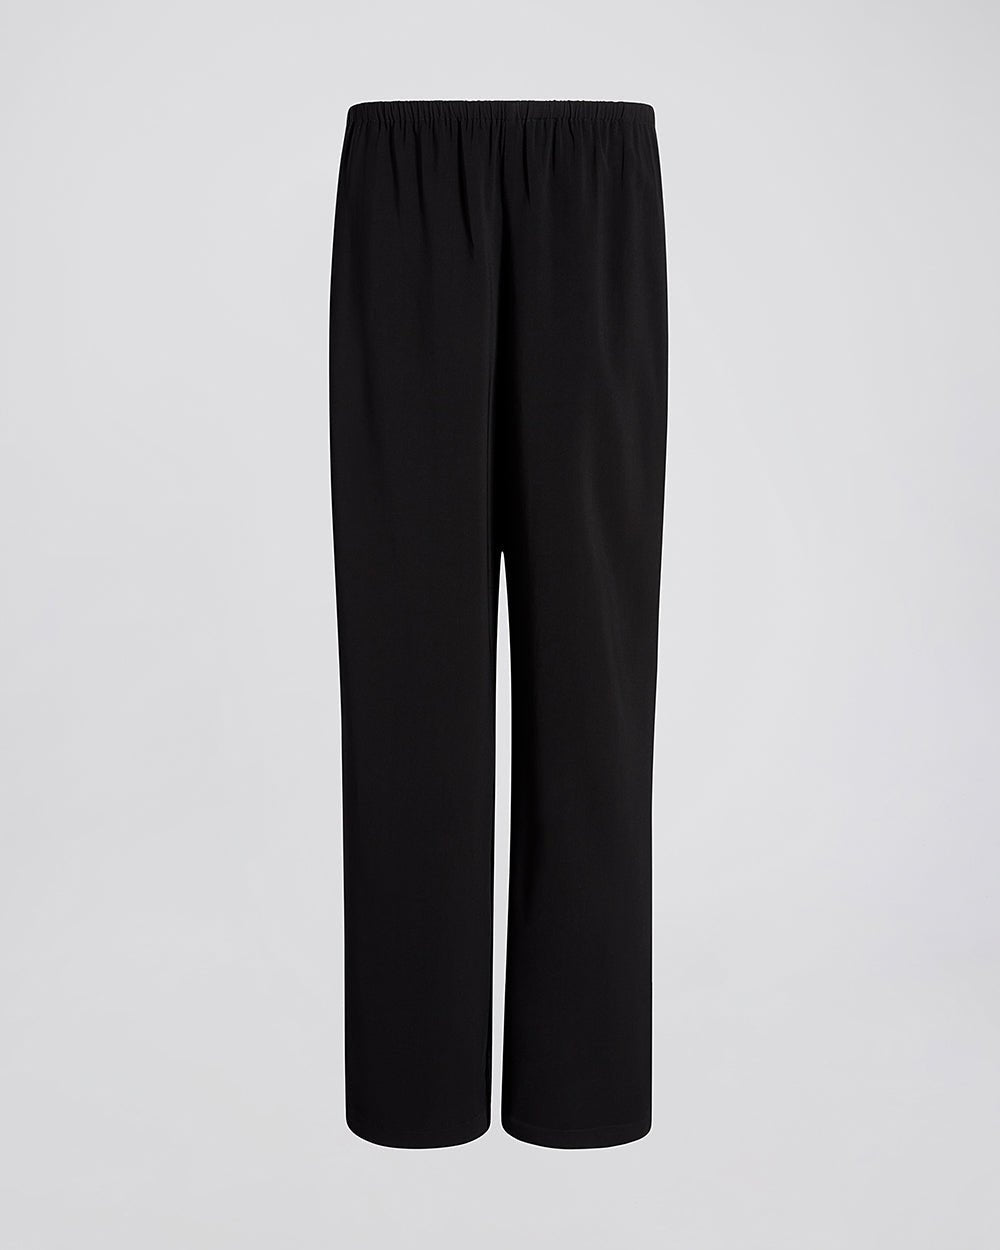 The Monaco Pant - Solid & Striped